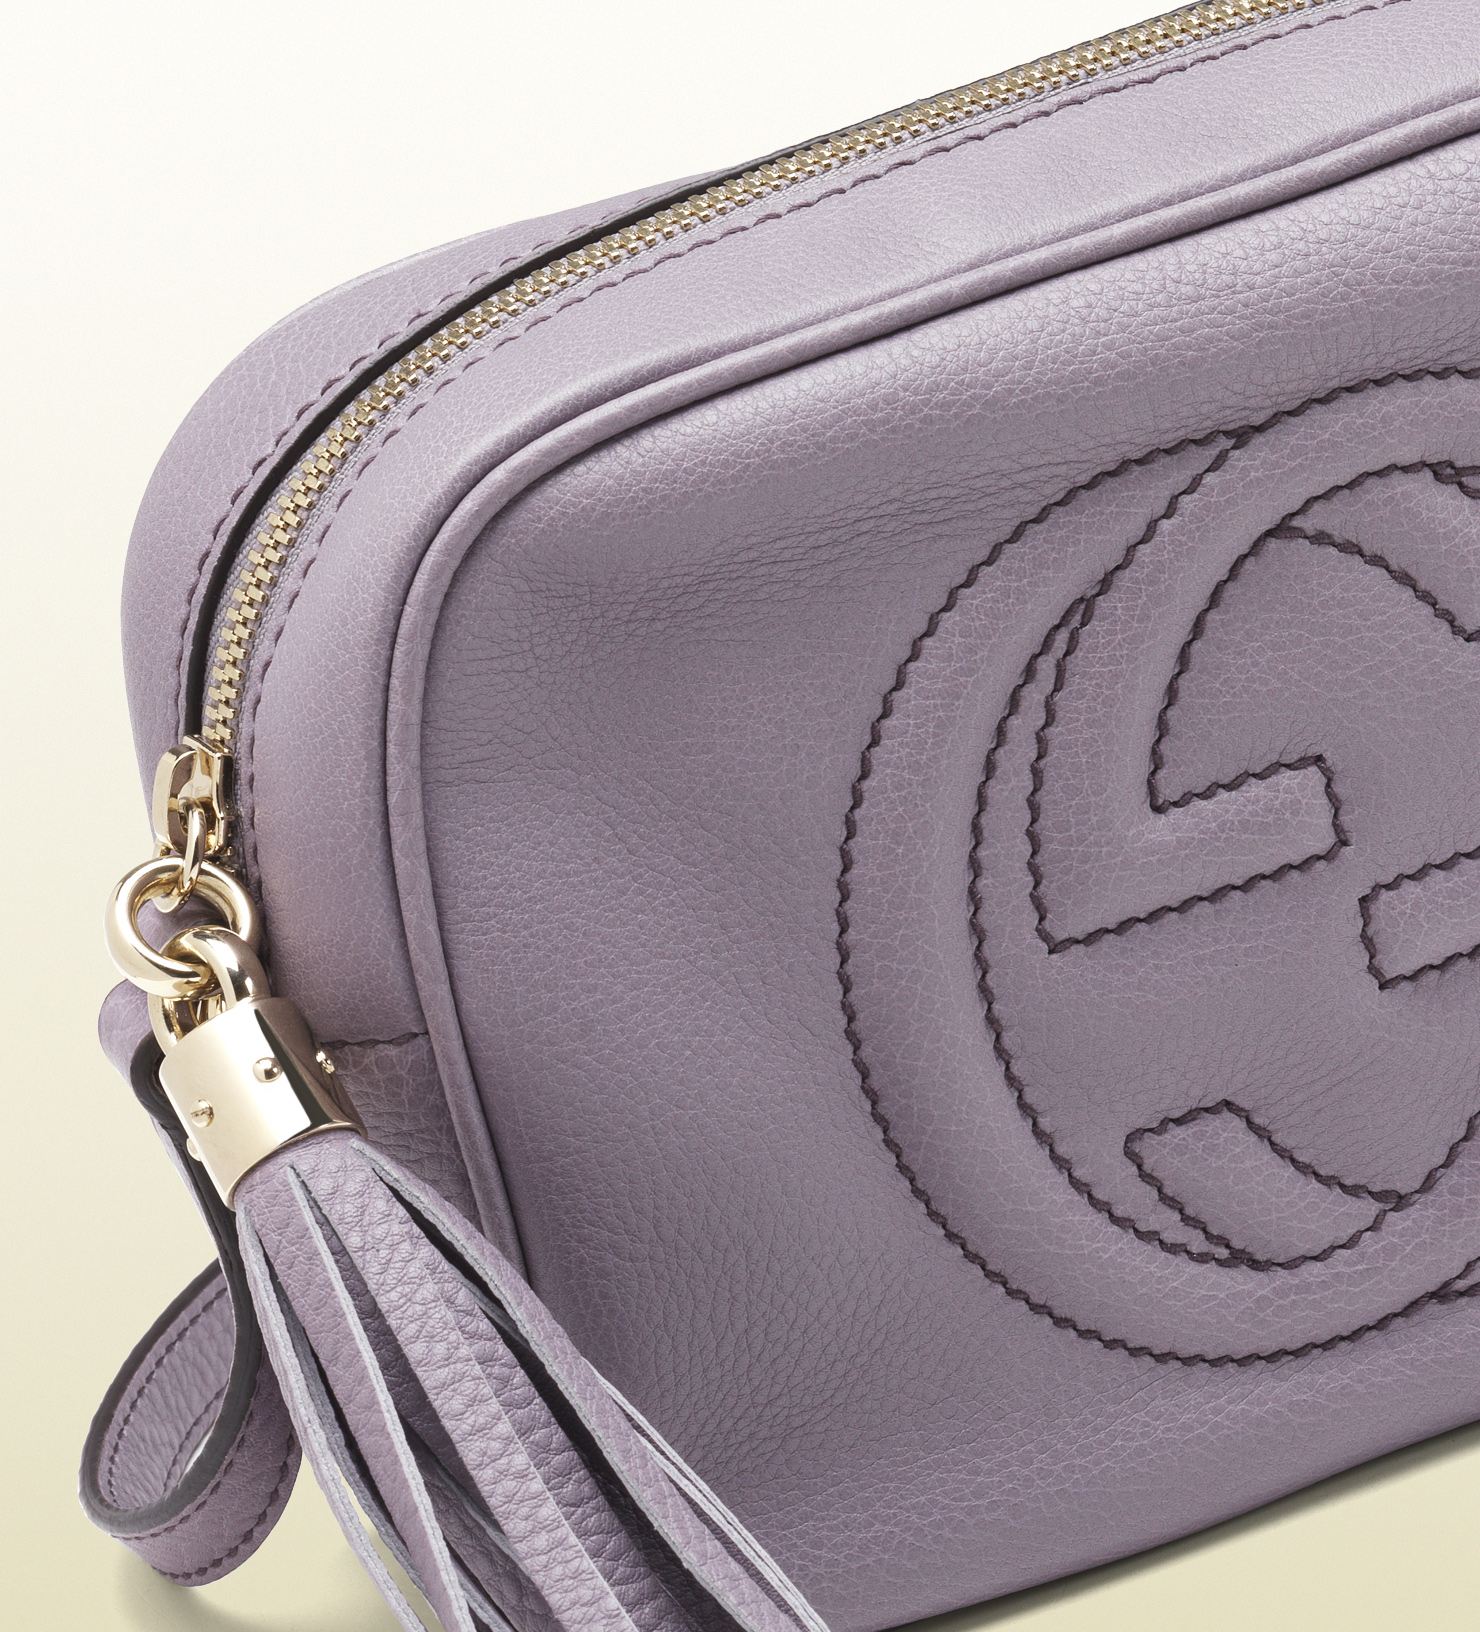 Lyst - Gucci Soho Lilac Leather Disco Bag in Gray